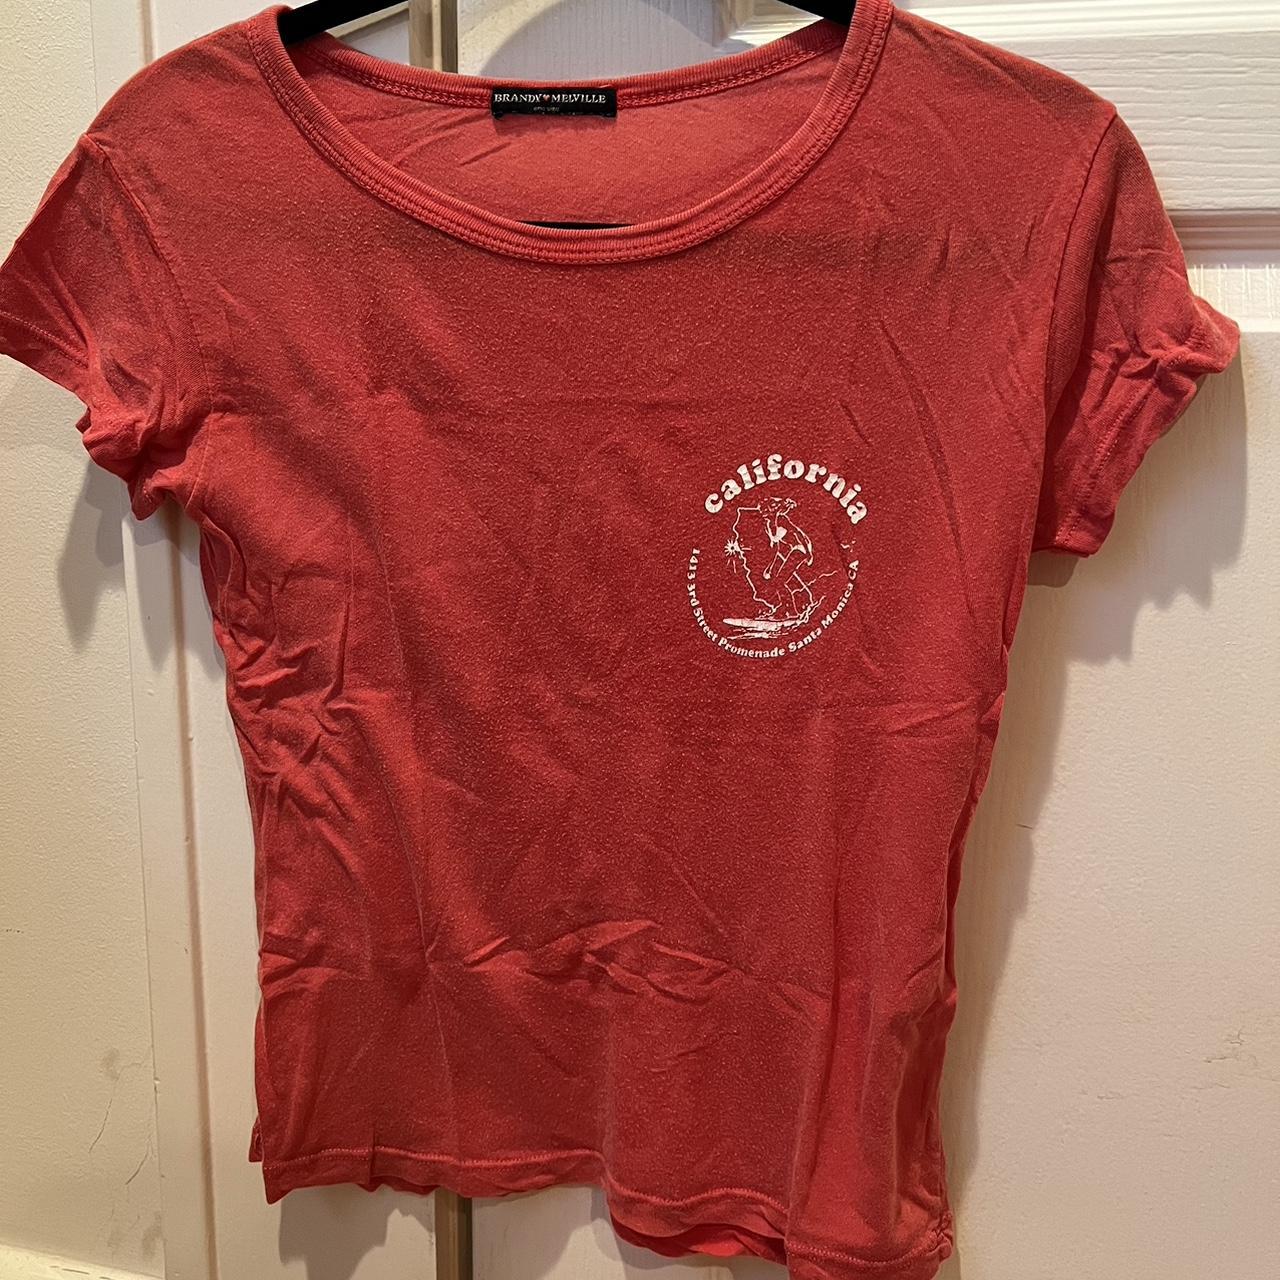 Brandy Melville red and white California graphic tee - Depop